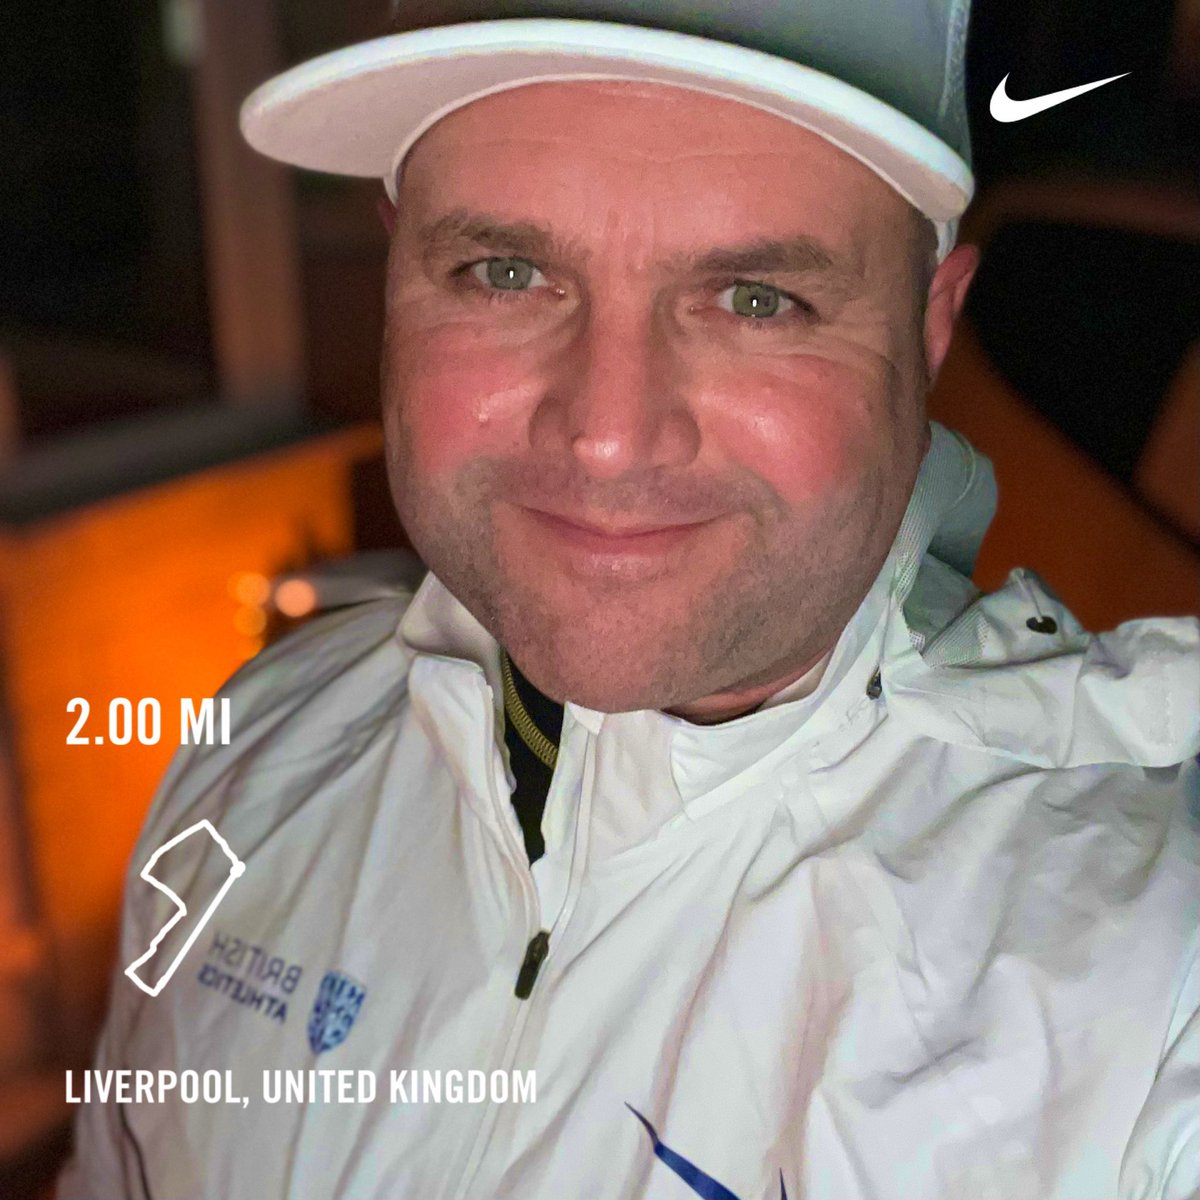 Day 15 #5KADAY ✅ Half Way Point. When I feel I HAVE to go for a run, I never enjoy it. When I feel I WANT to go for a run, I always love it. Find more things you WANT to do! 👊